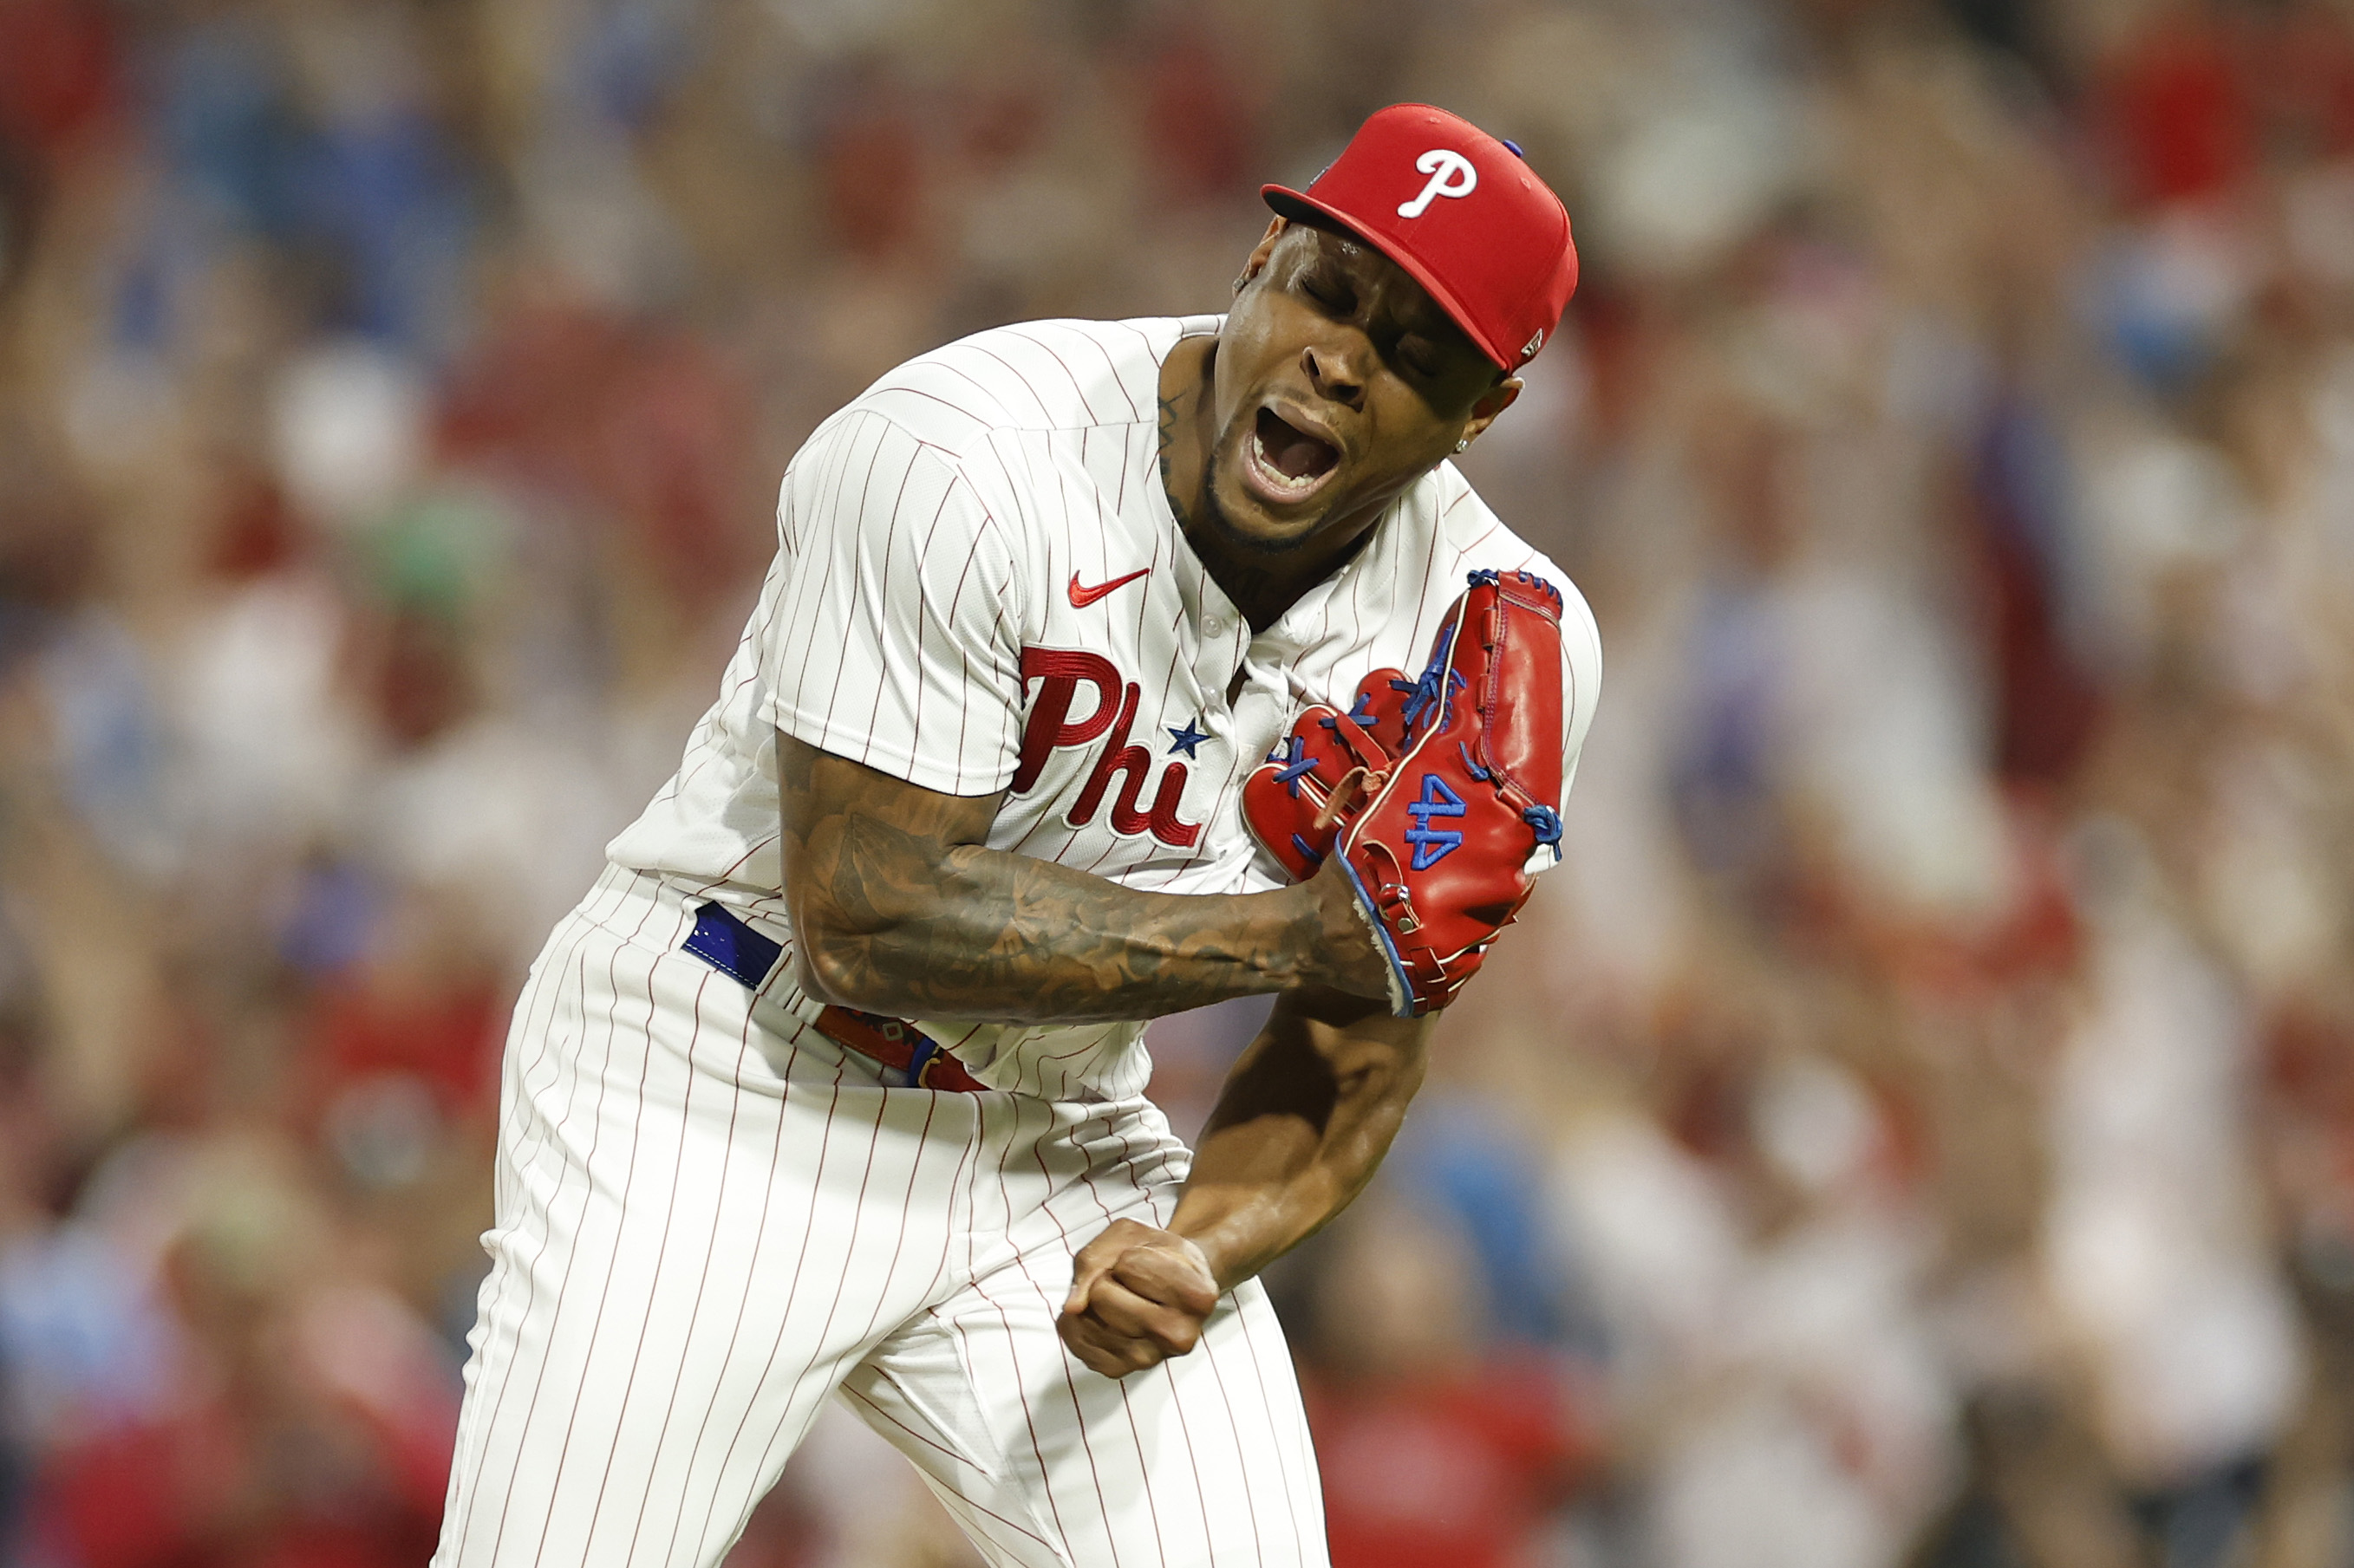 Phillies Vs. Braves Highlights: Phillies blank Braves 3-0 in NLDS Game 1